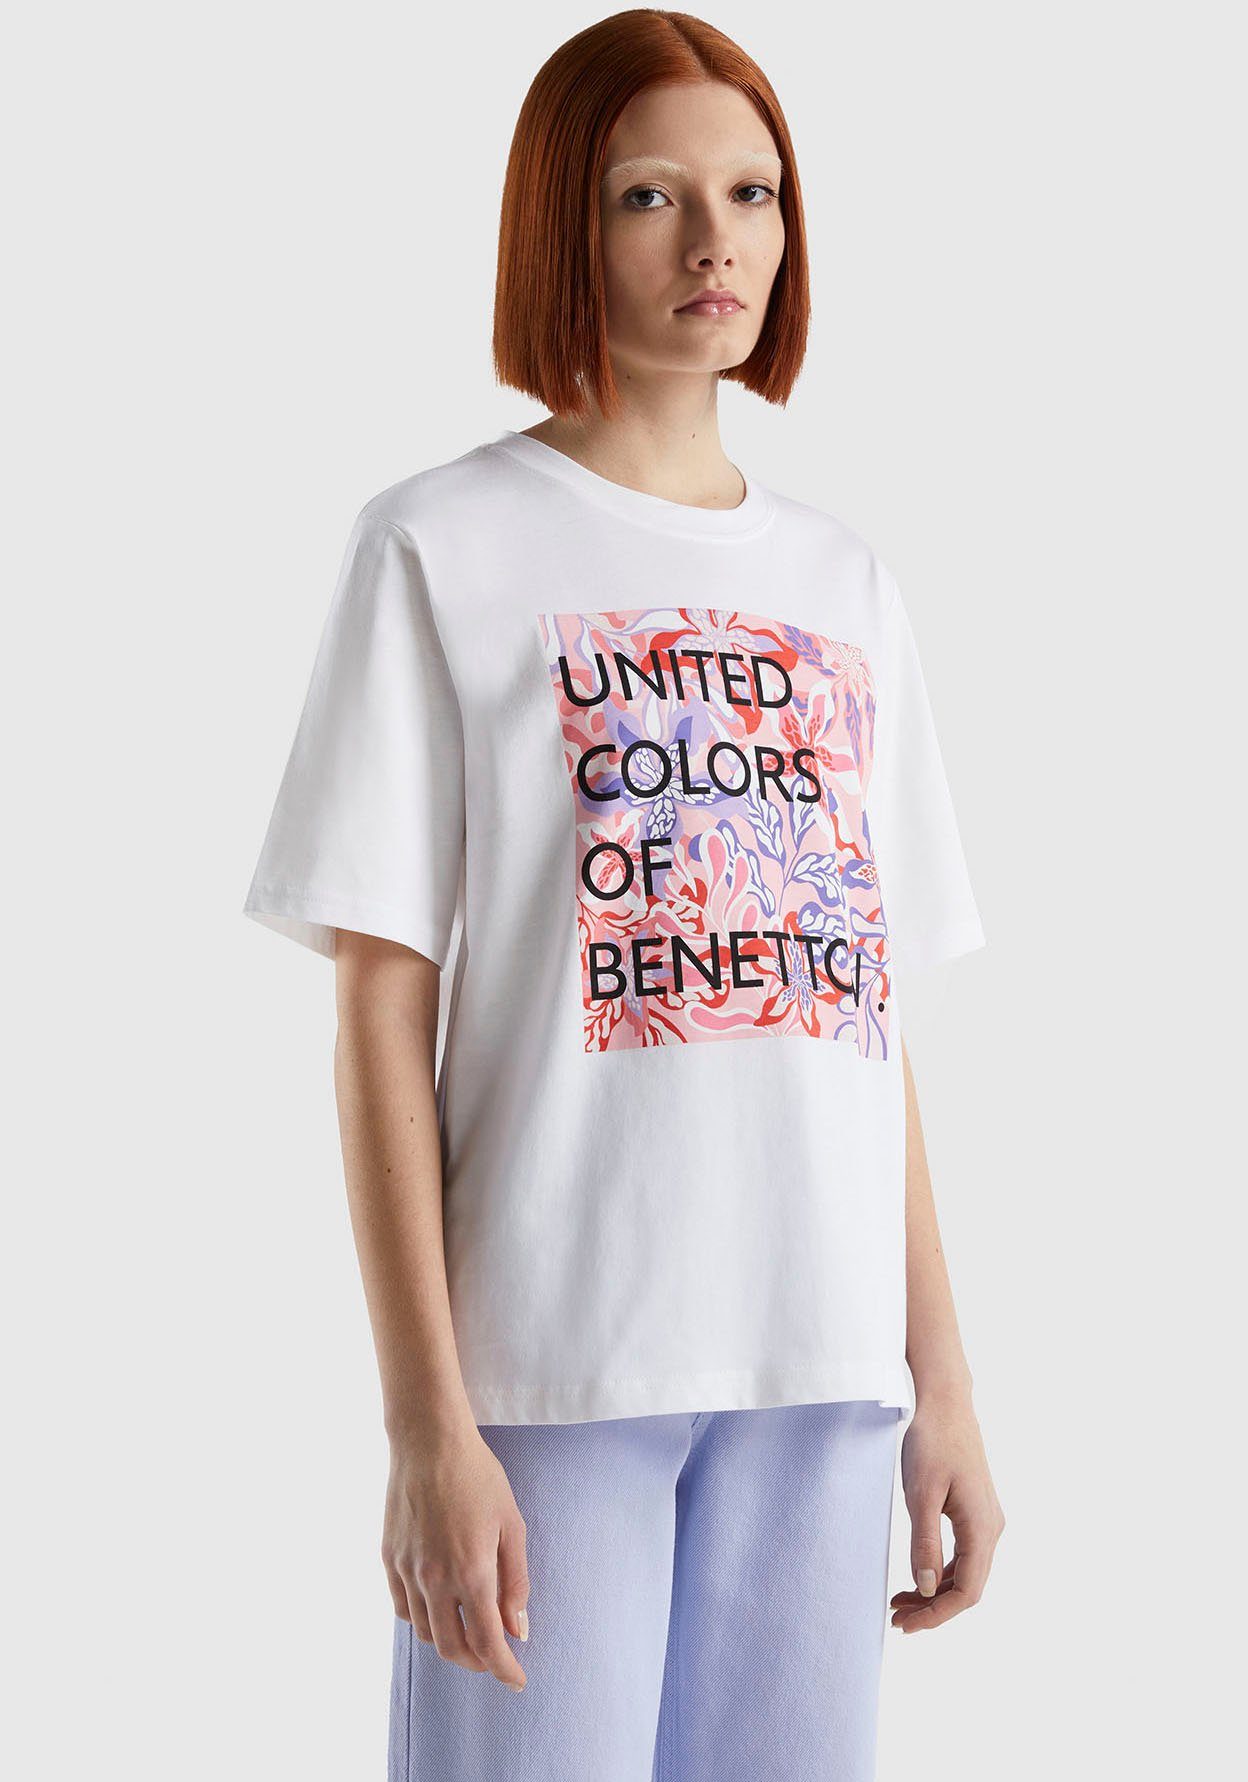 United Colors of Benetton T-Shirt weiß mit pink